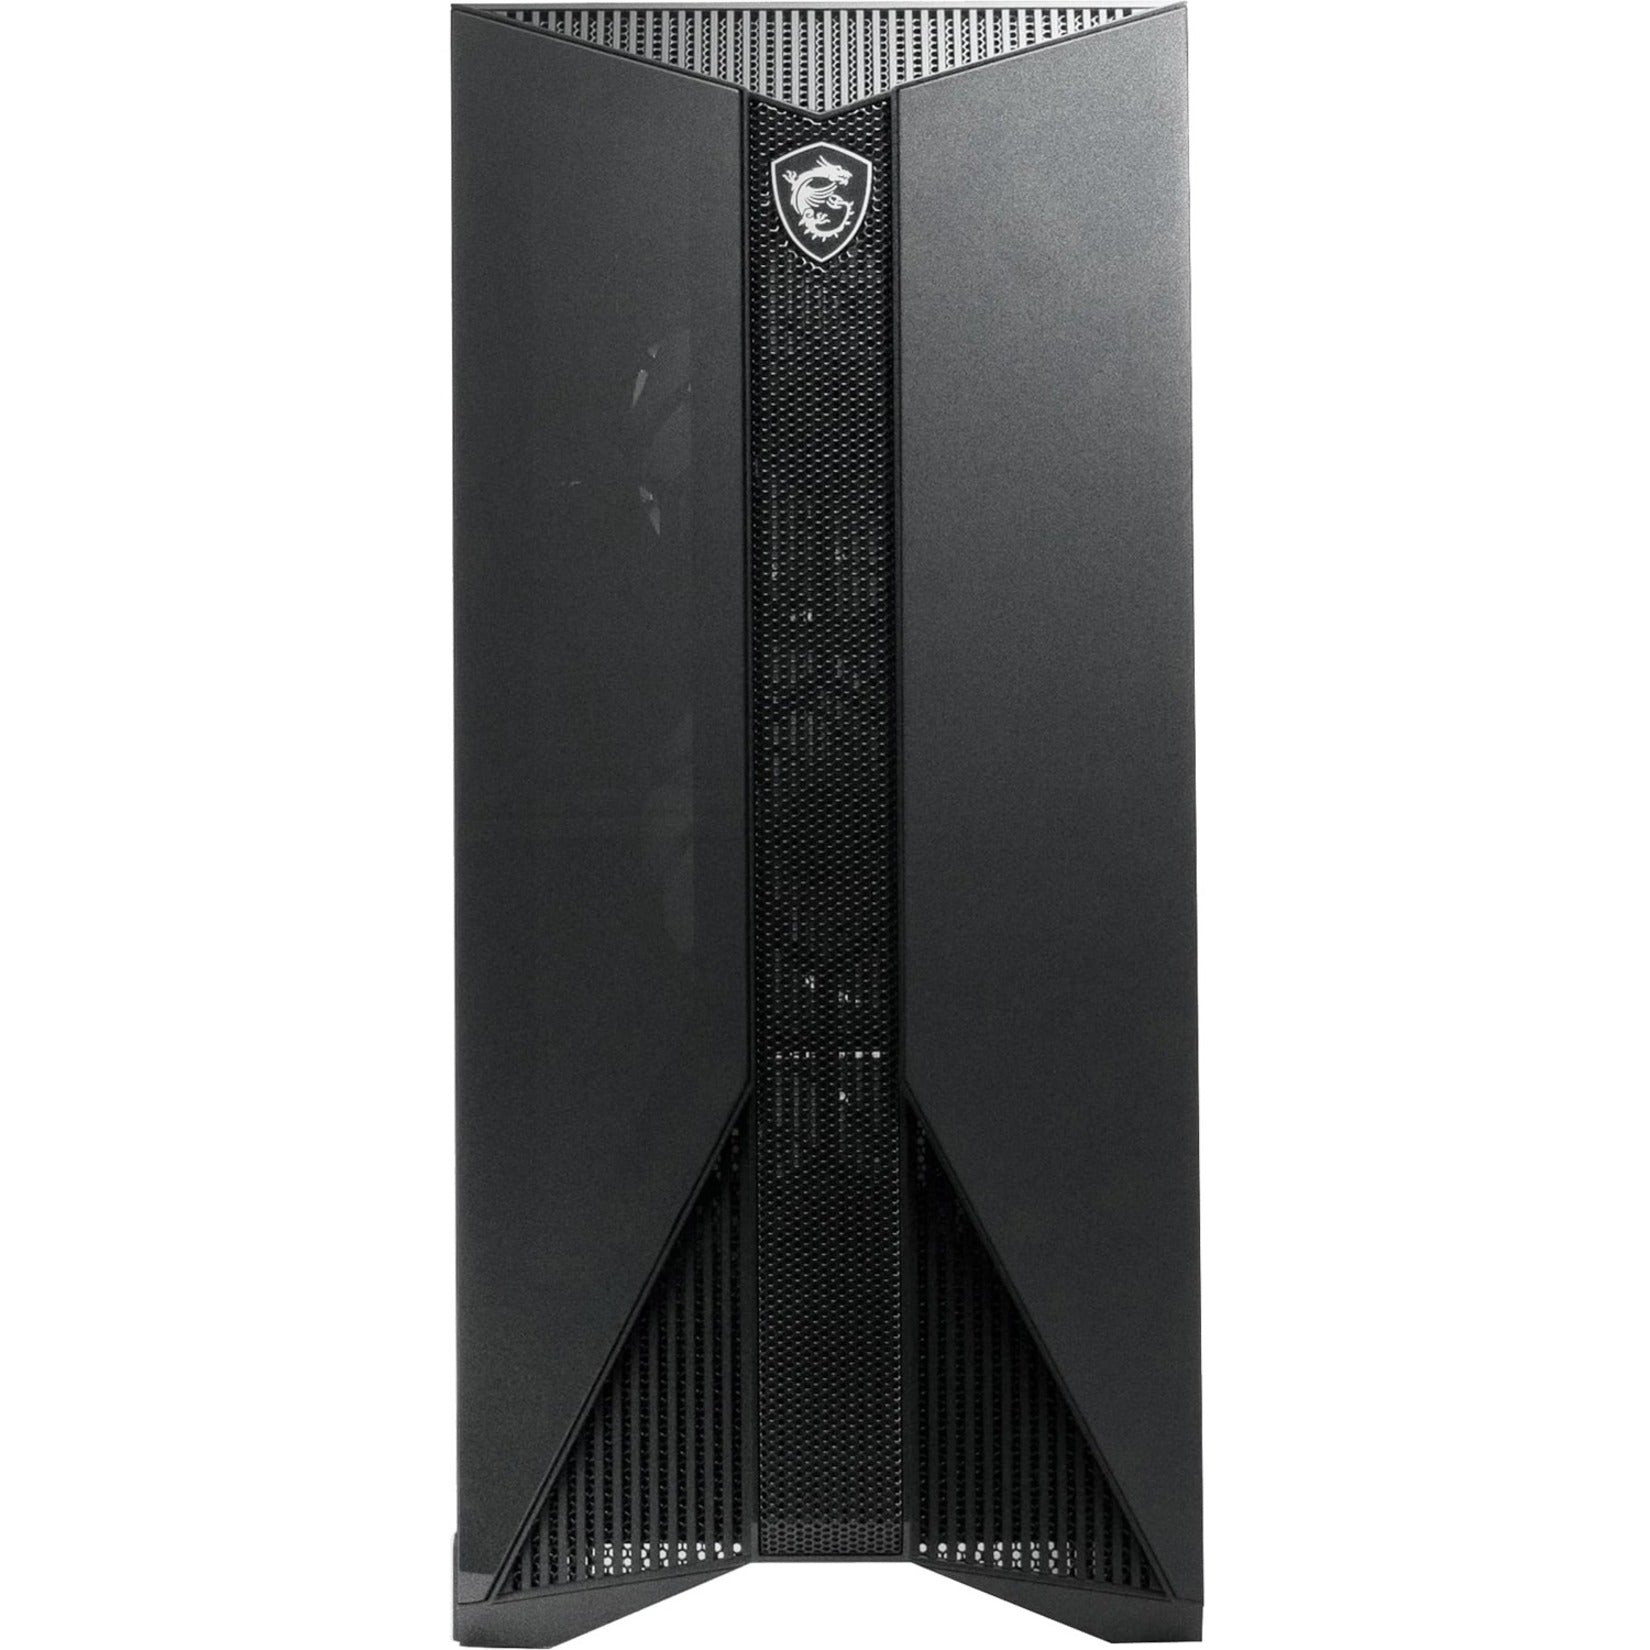 MSI Aegis RS Aegis RS 12TE-258US Gaming Desktop Computer - Intel Core i7 12th Gen i7-12700K Dodeca-core (12 Core) 3.60 GHz - 16 GB RAM DDR5 SDRAM - 1 TB M.2 PCI Express NVMe SSD - Tower - Black Front image